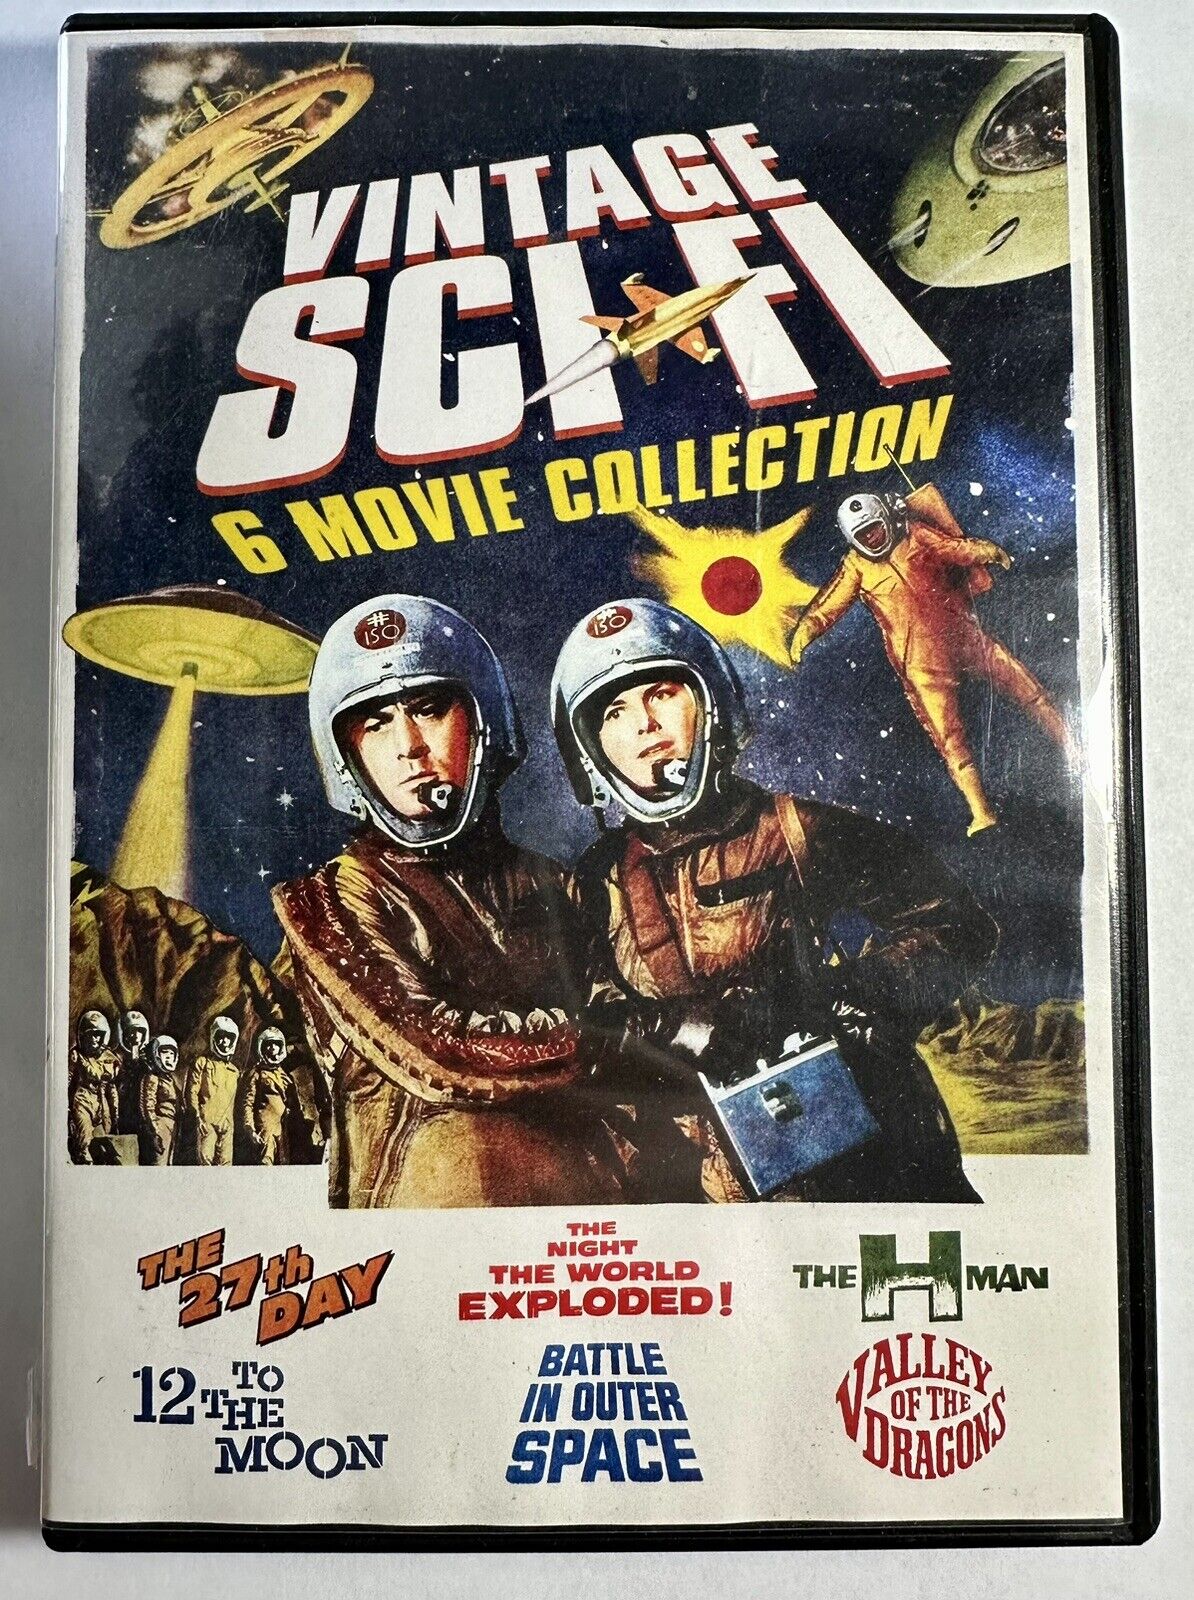 Vintage Sci-Fi: 6 Movie Collection (1957-1961), 2015, 2-Disc DVD, B&W + Color